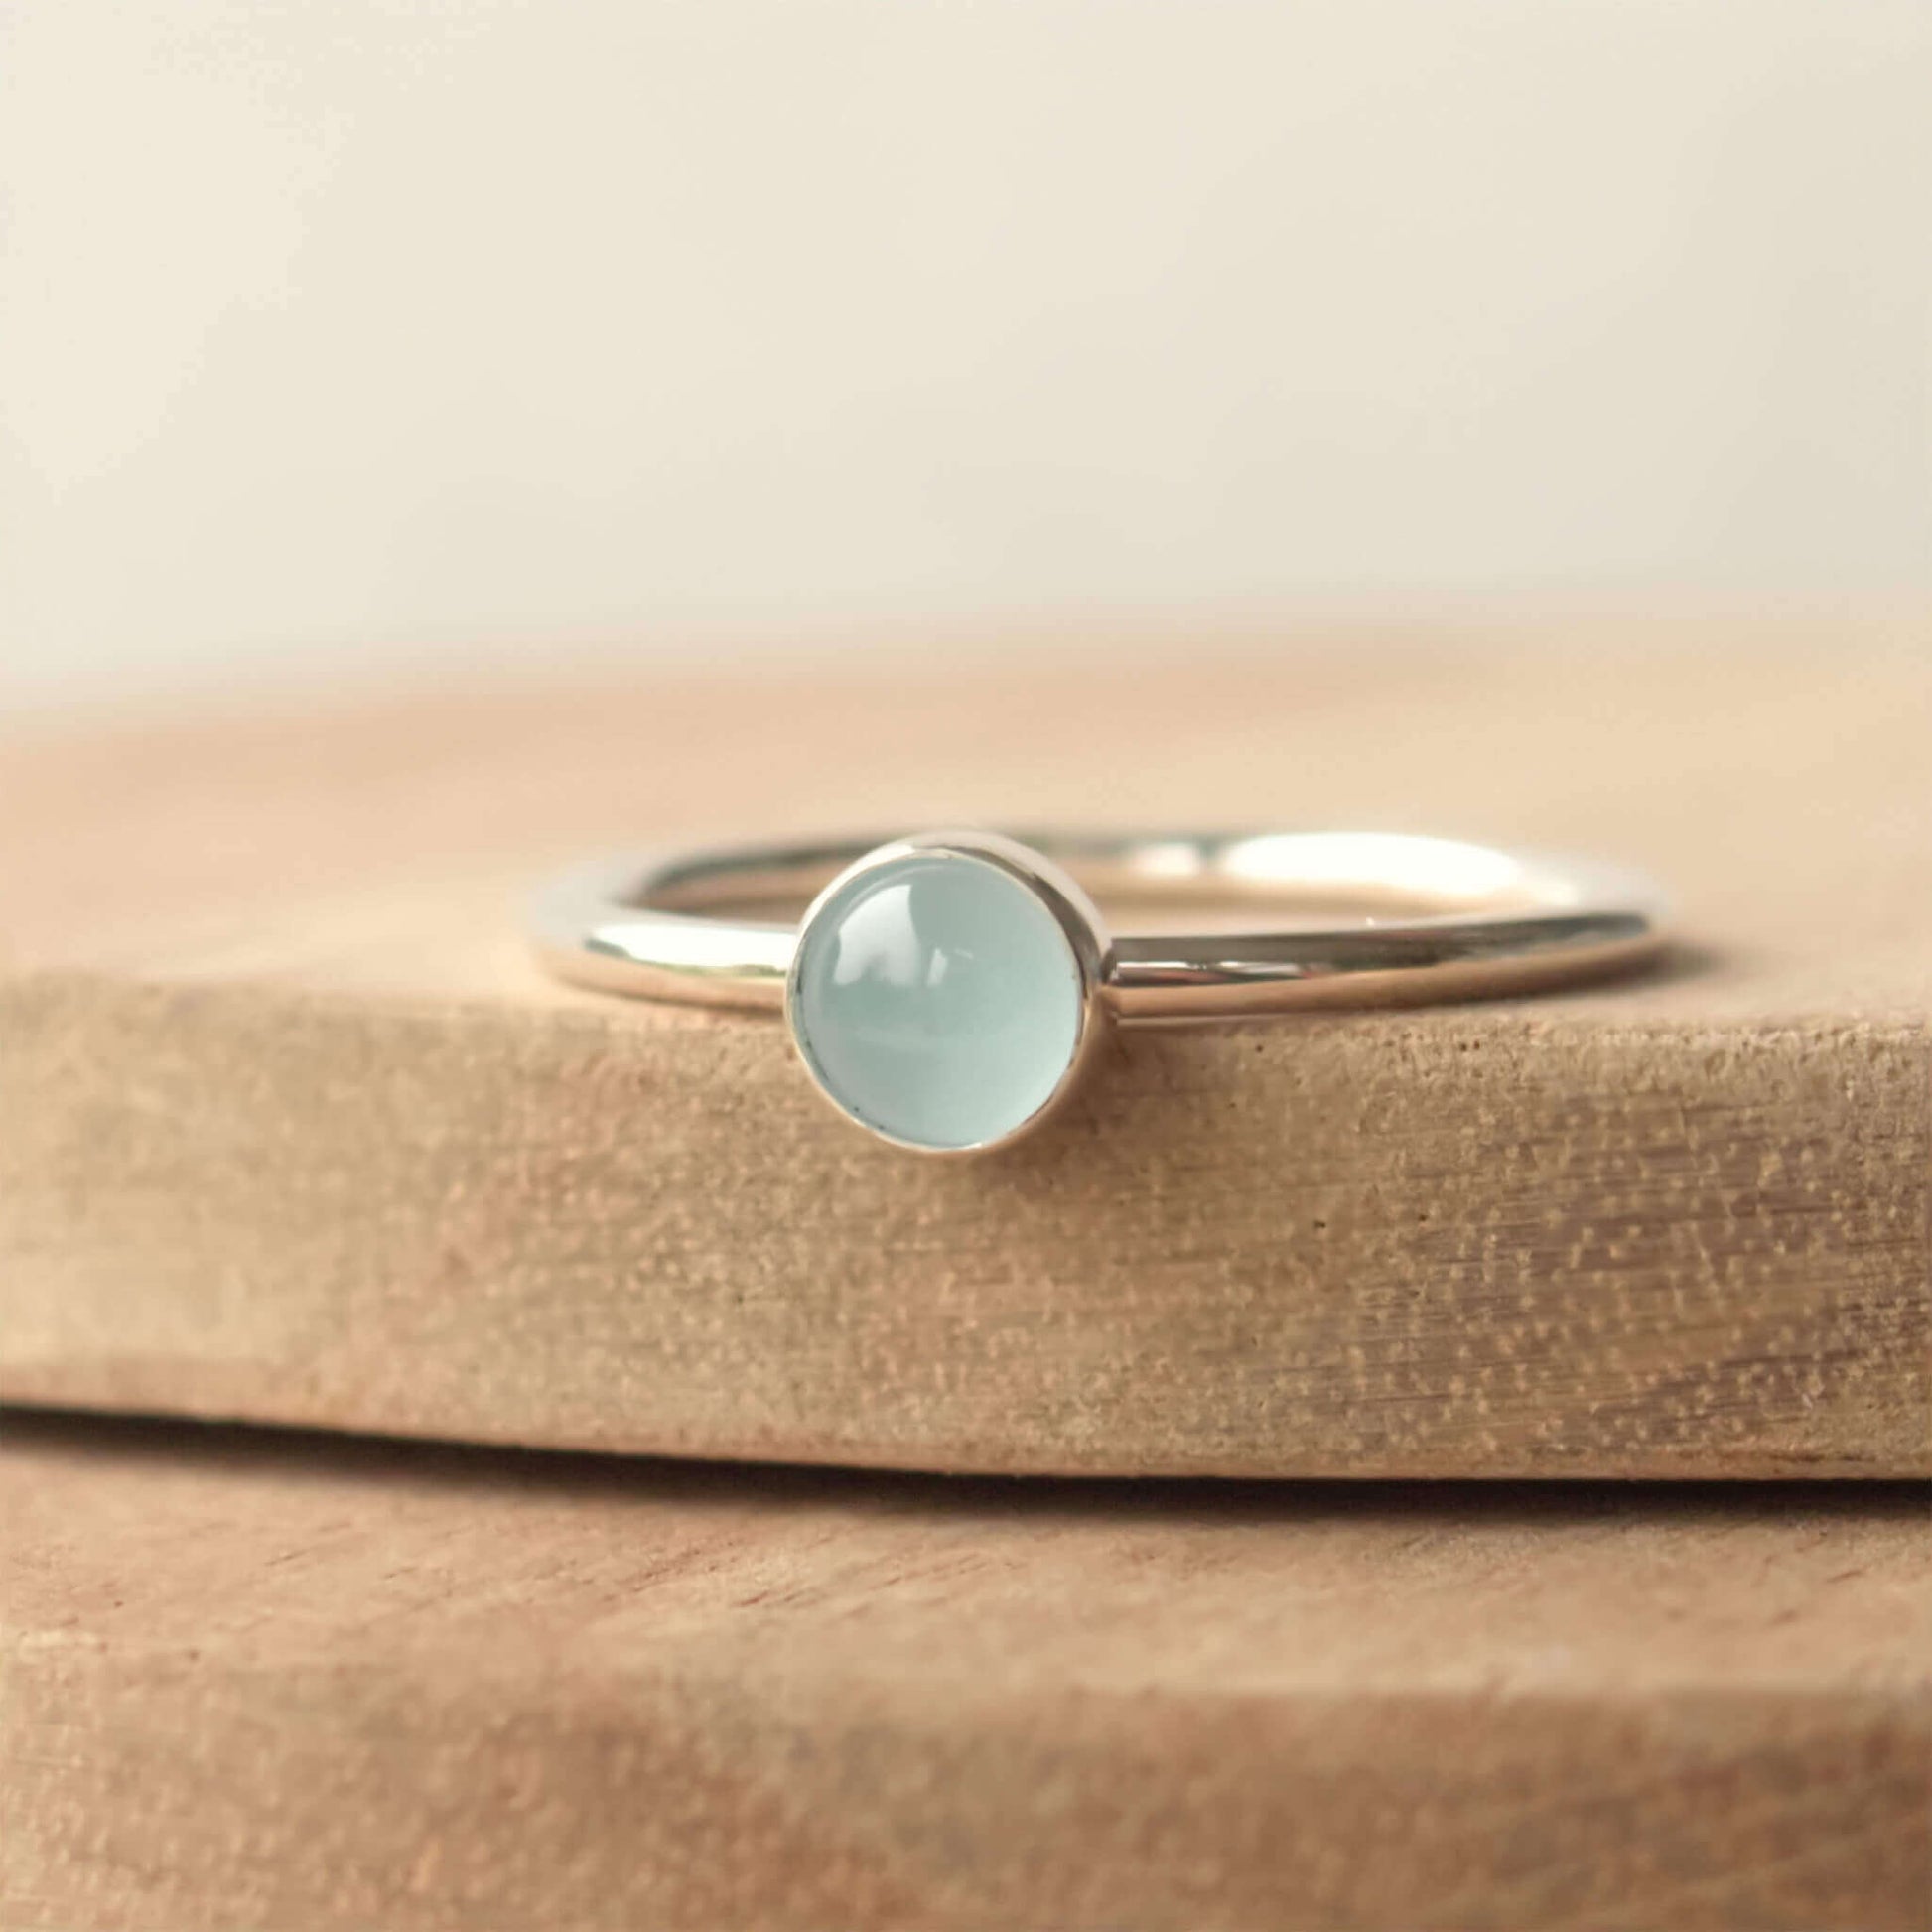 Cloudy Aquamarine birthstone ring for March. A 5mm round pale blue cabochon set simply onto a simple round band. The ring is made to measure to your size by maram jewellery in Scotland